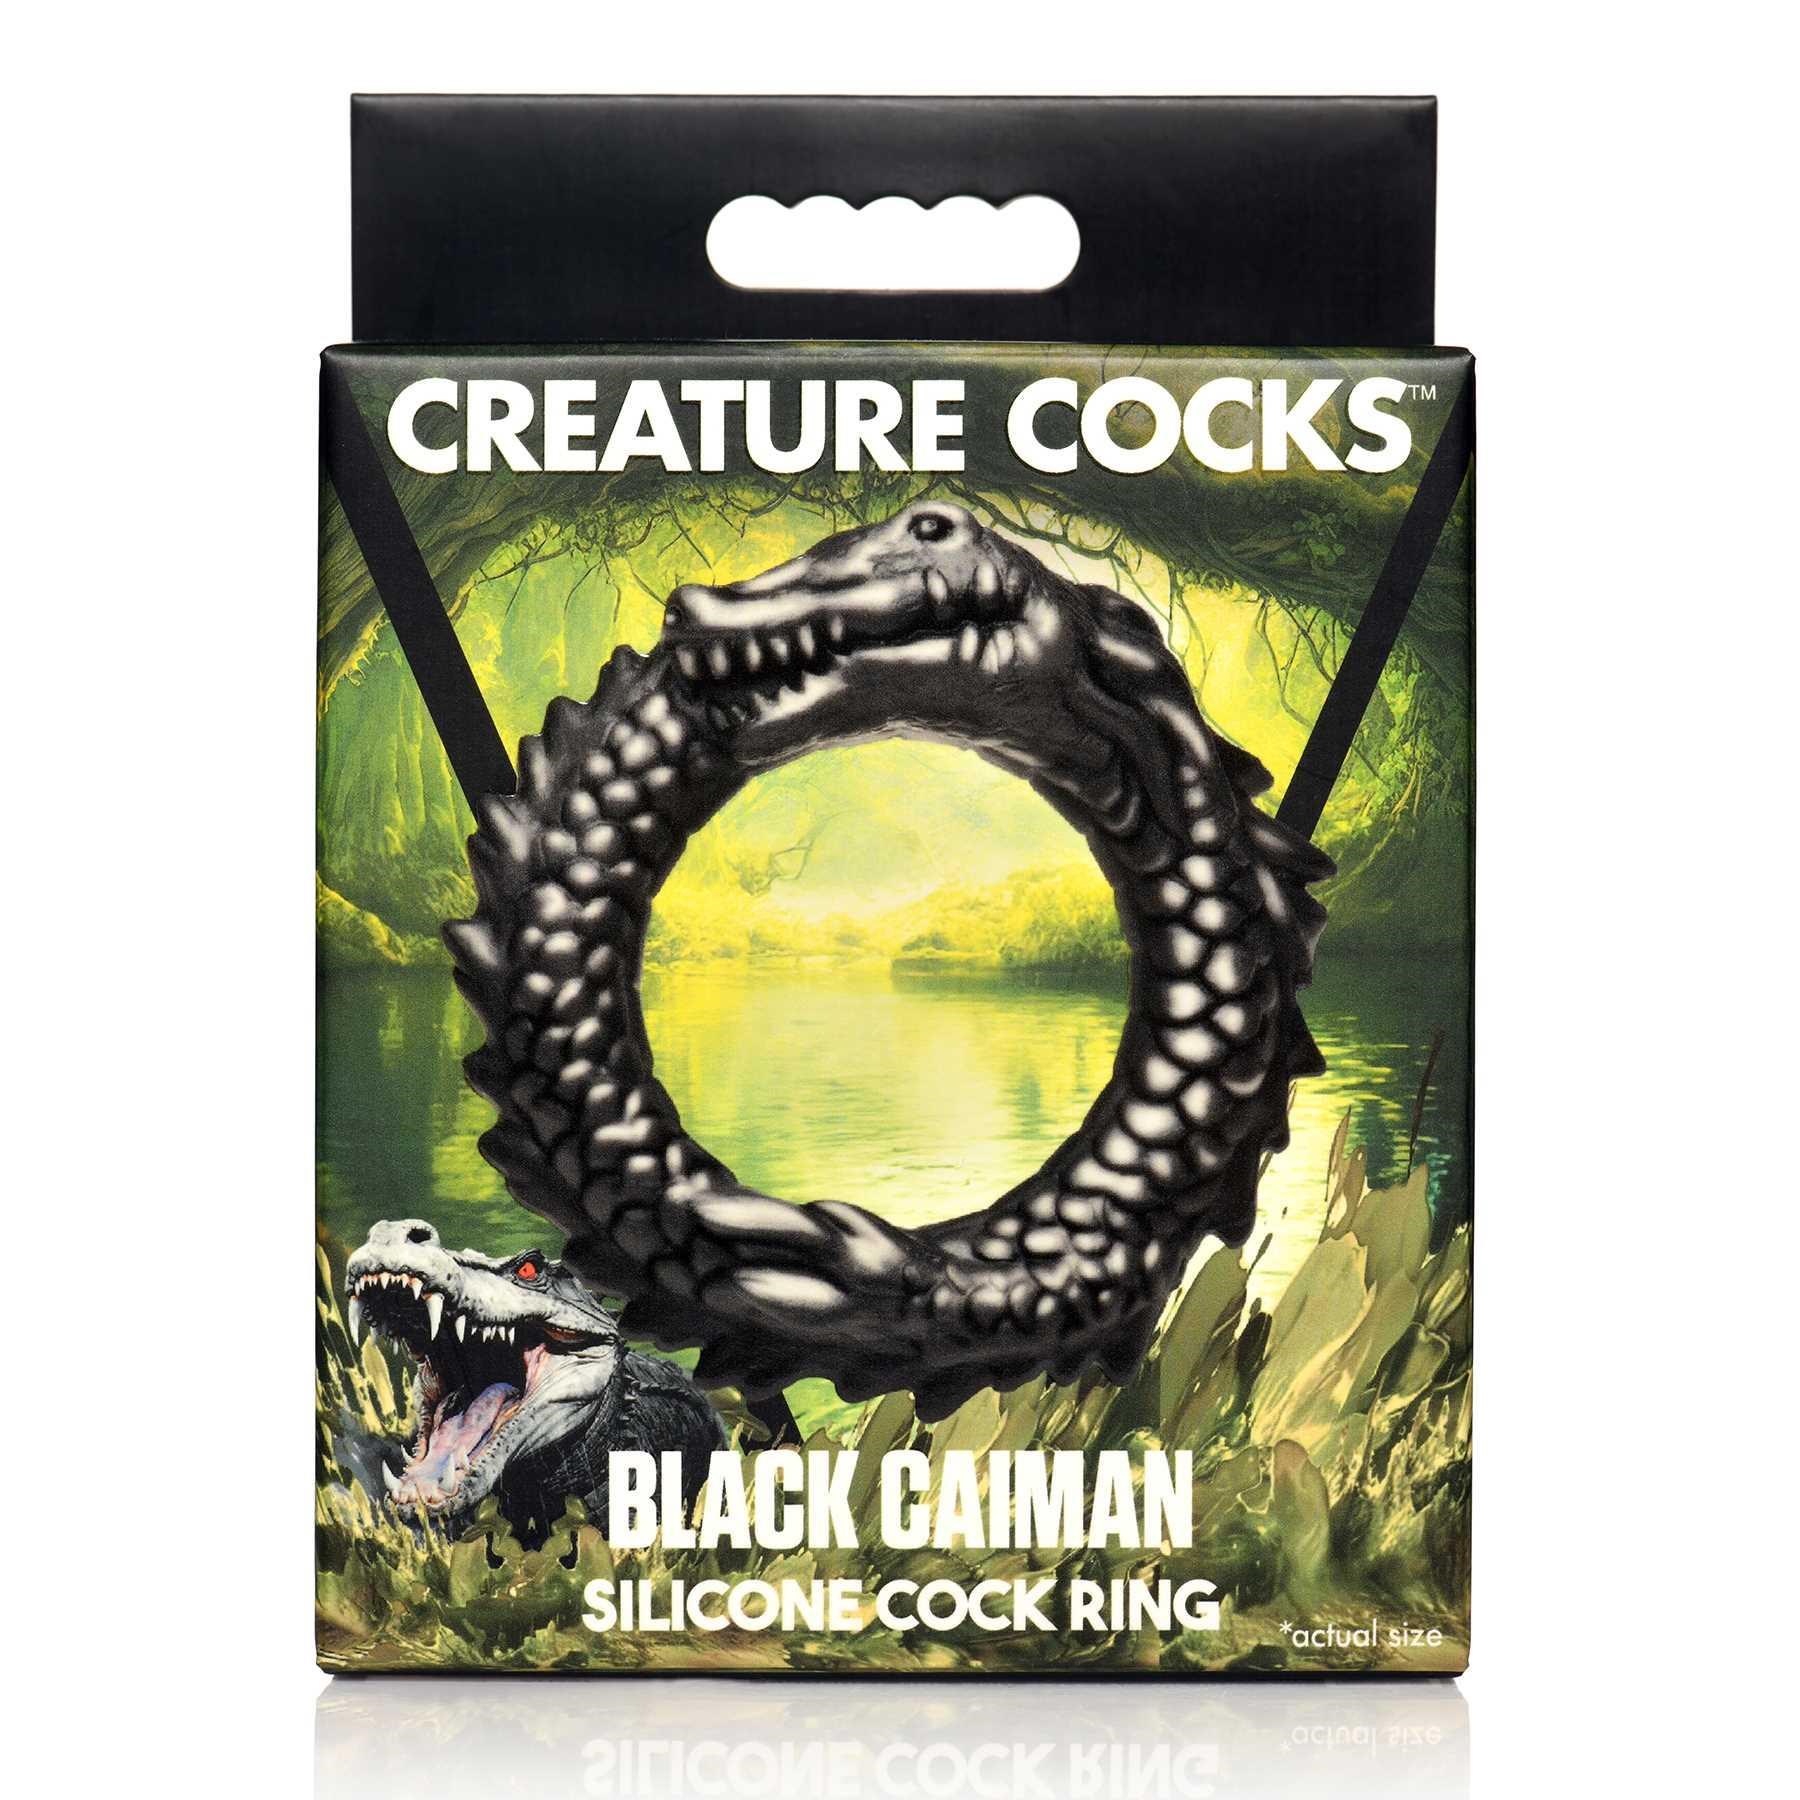 Creature Cocks Black Caiman Silicone Cock Ring packaging